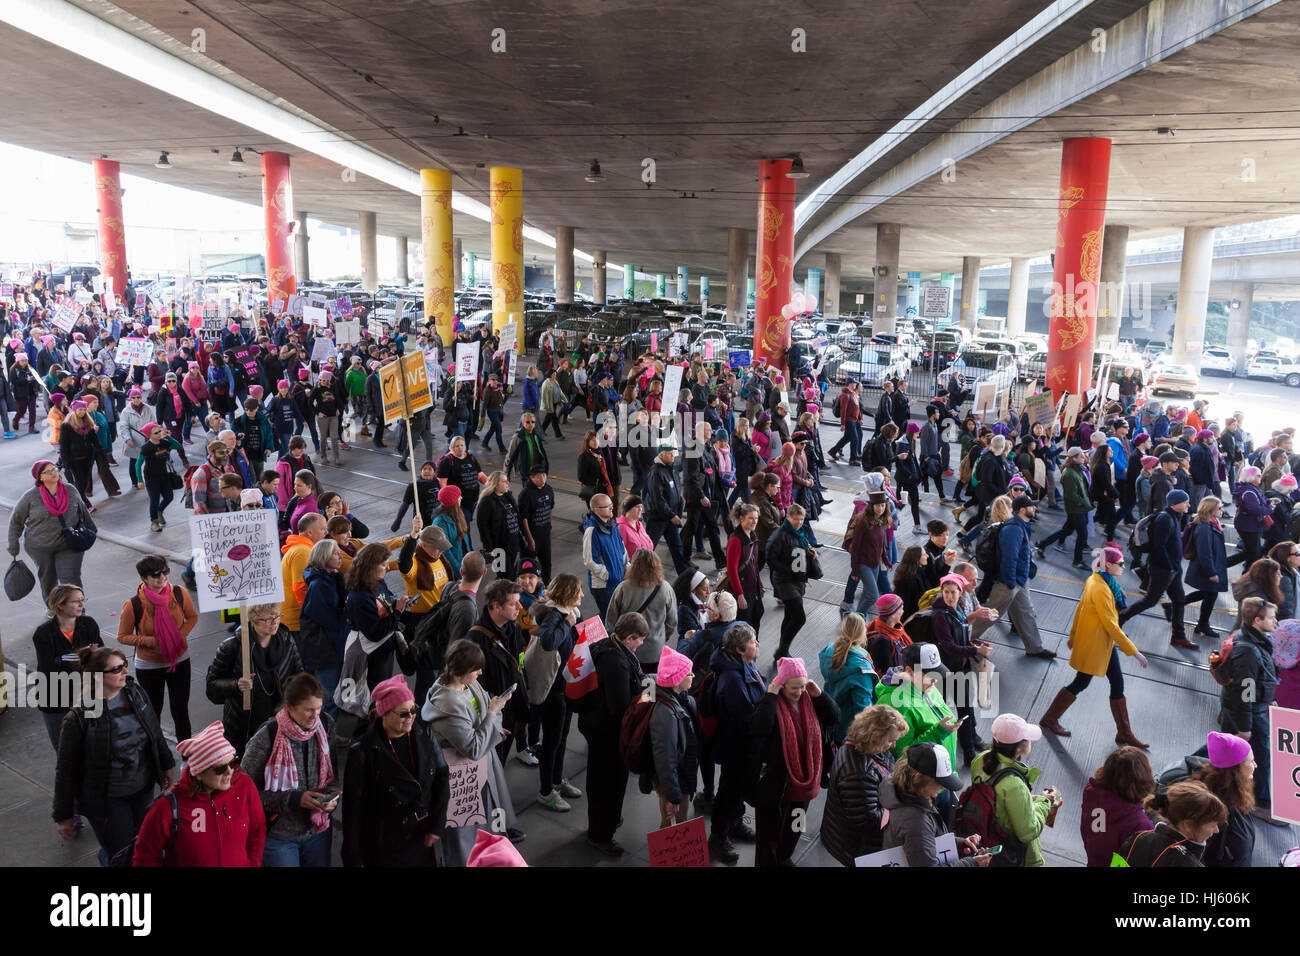 Seattle, United States. 21st Jan, 2017. Seattle, Washington: Supporters march through the International District under I-5. Over 100,000 people attended the Womxn's March on Seattle on January 21, 2017 in solidarity with the national Women's March on Washington, DC The mission of the silent march is to bring diverse women together for collective action. Credit: Paul Gordon/Alamy Live News Stock Photo